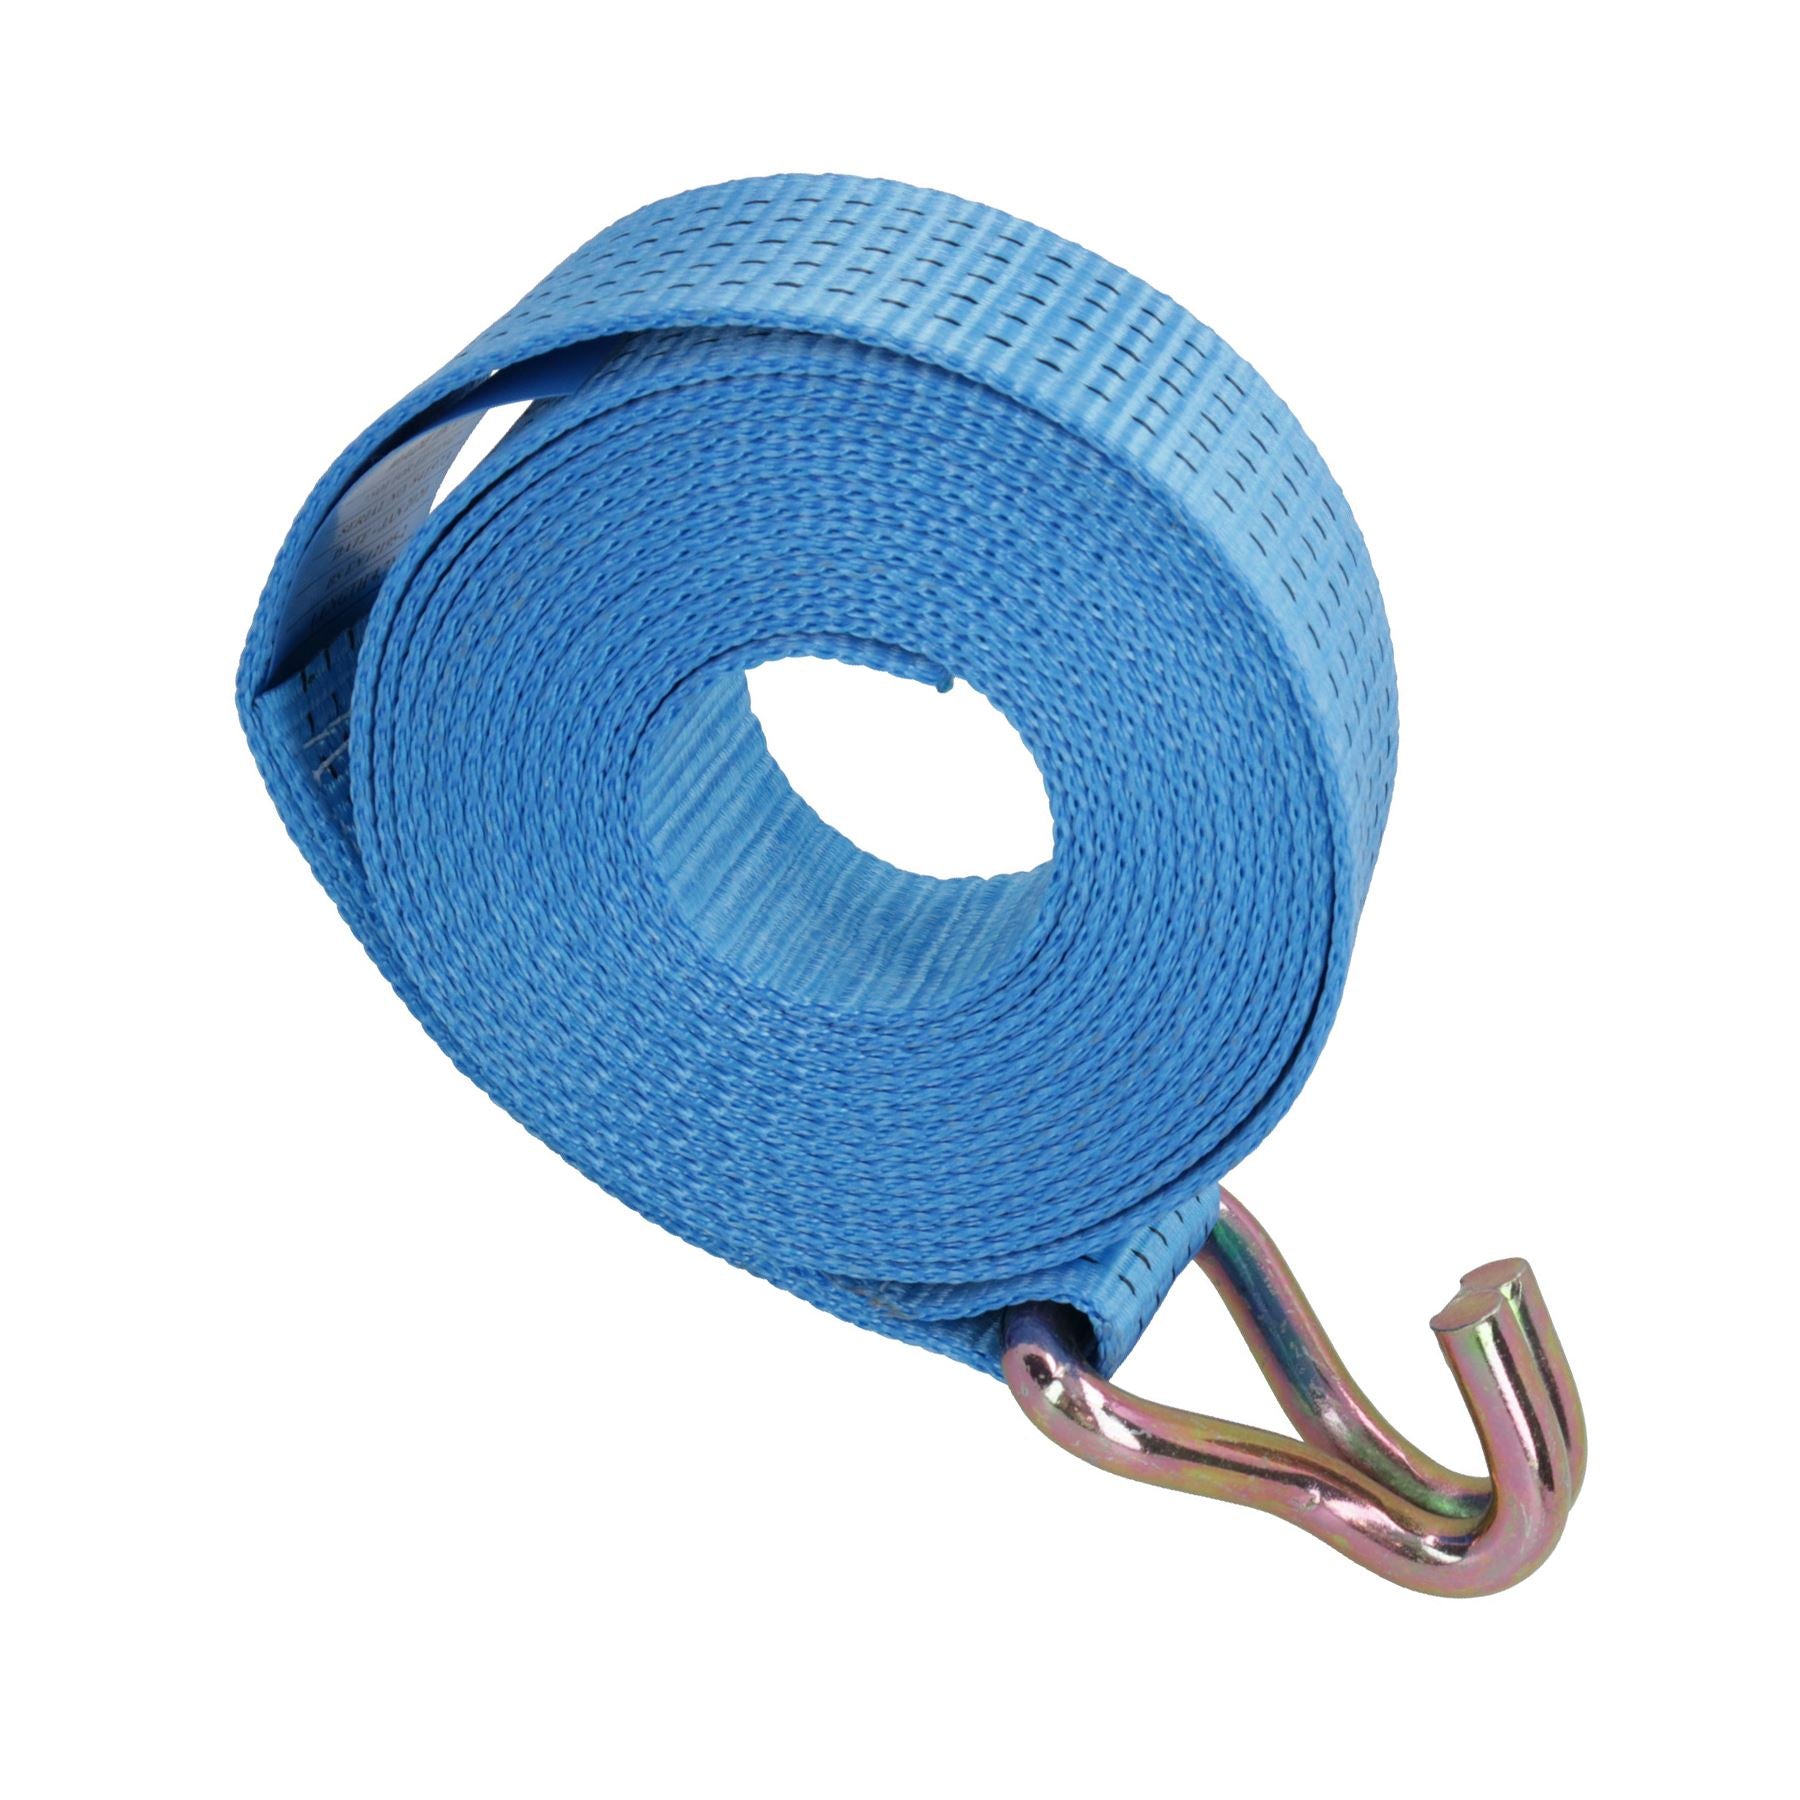 Spare Strap for Ratchet Trailer Tie Down 5m 2.5 Ton Lashing